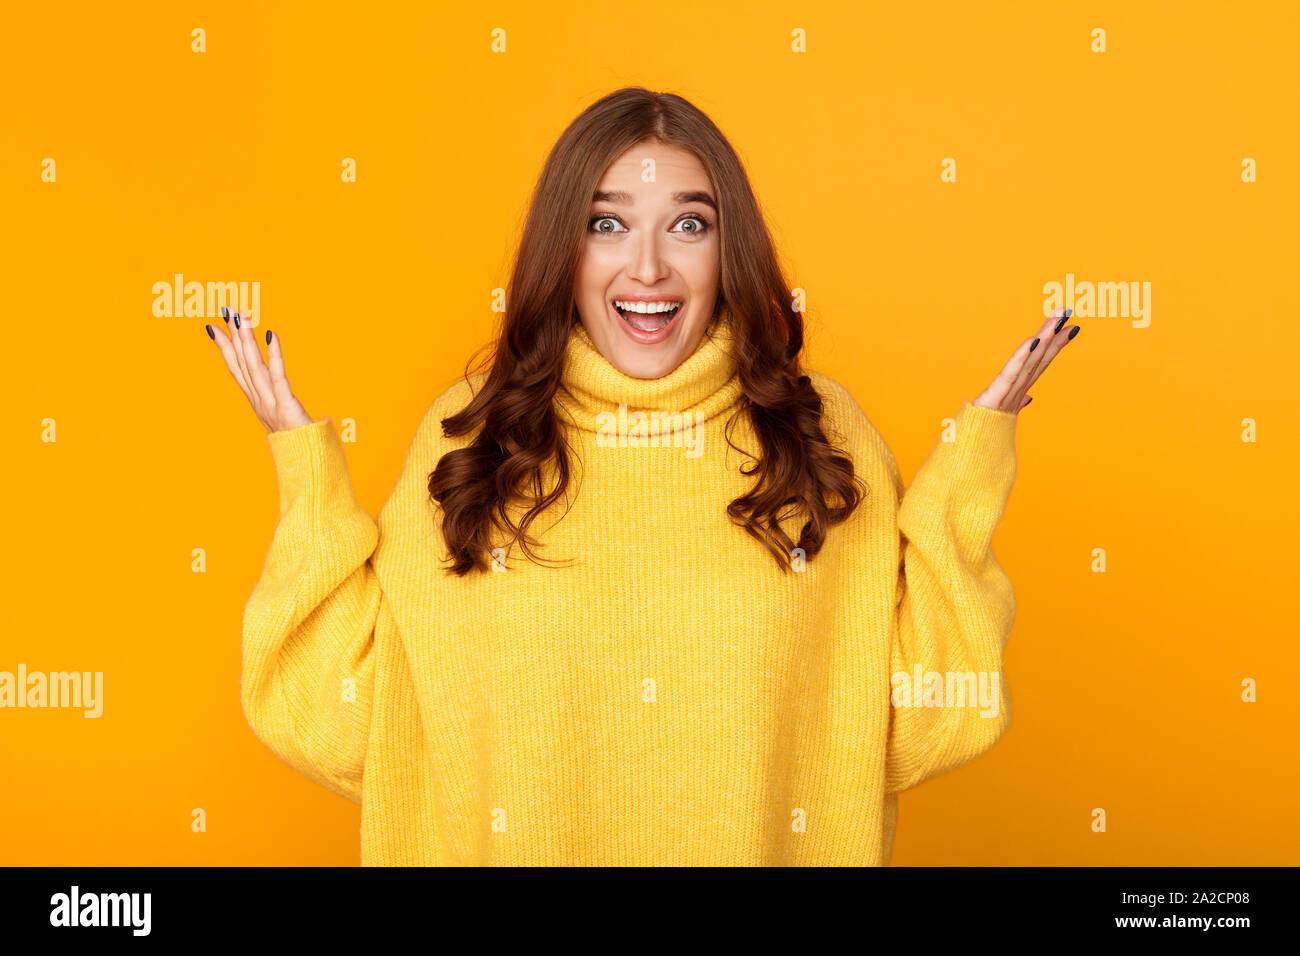 Excited woman raising hands in happiness, yellow background Stock Photo